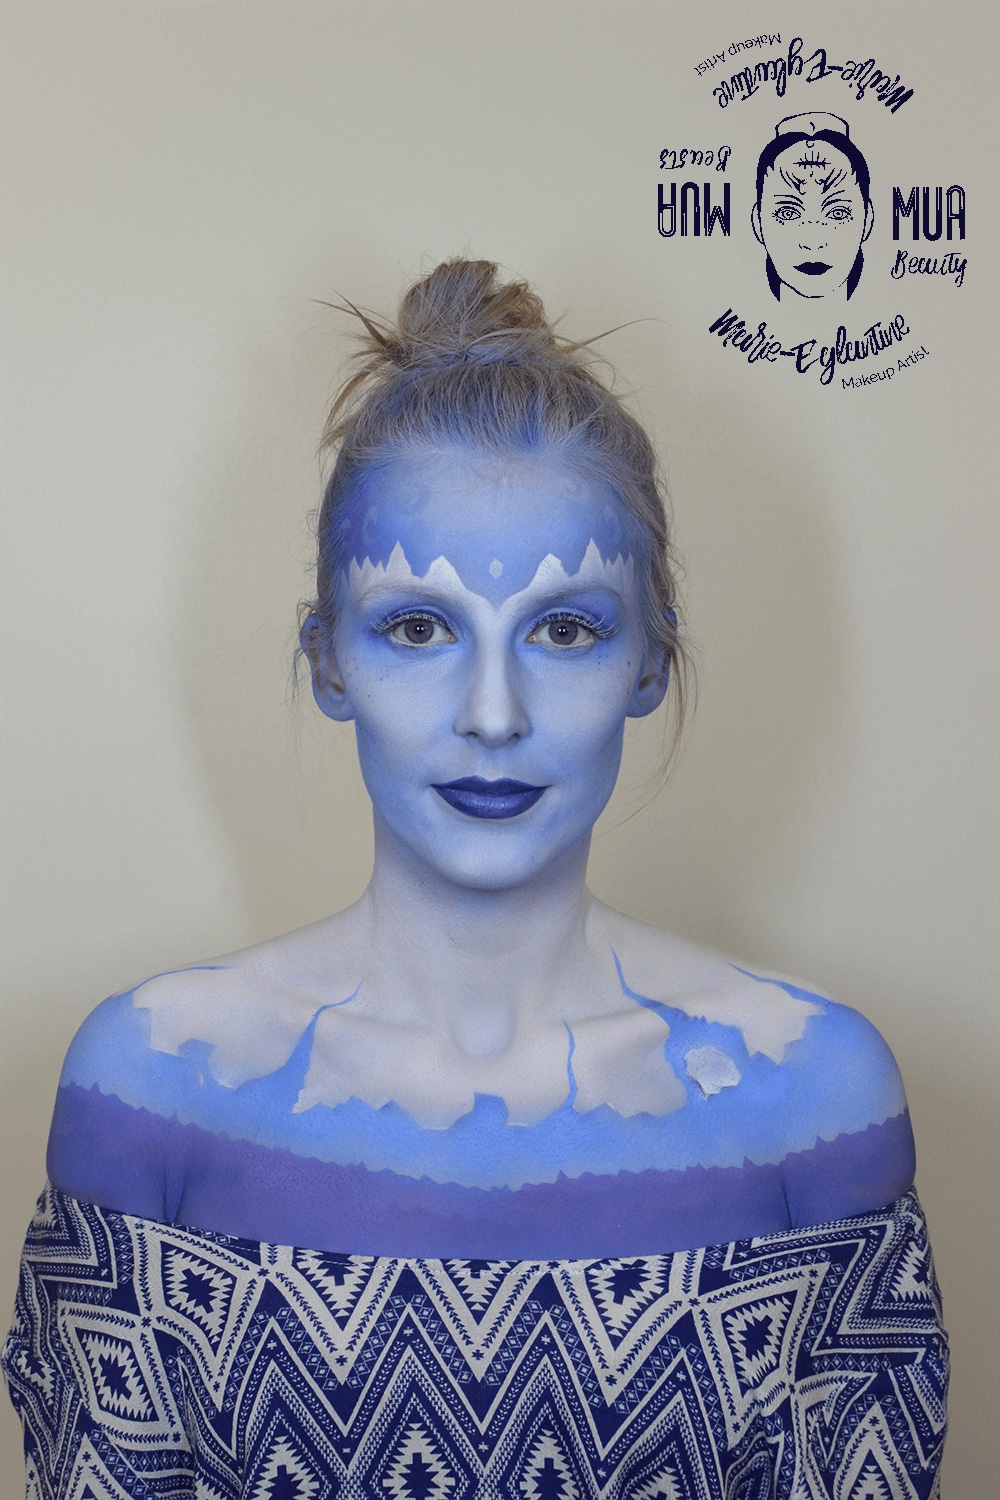 Icequeen - bodypainting - Phone picture